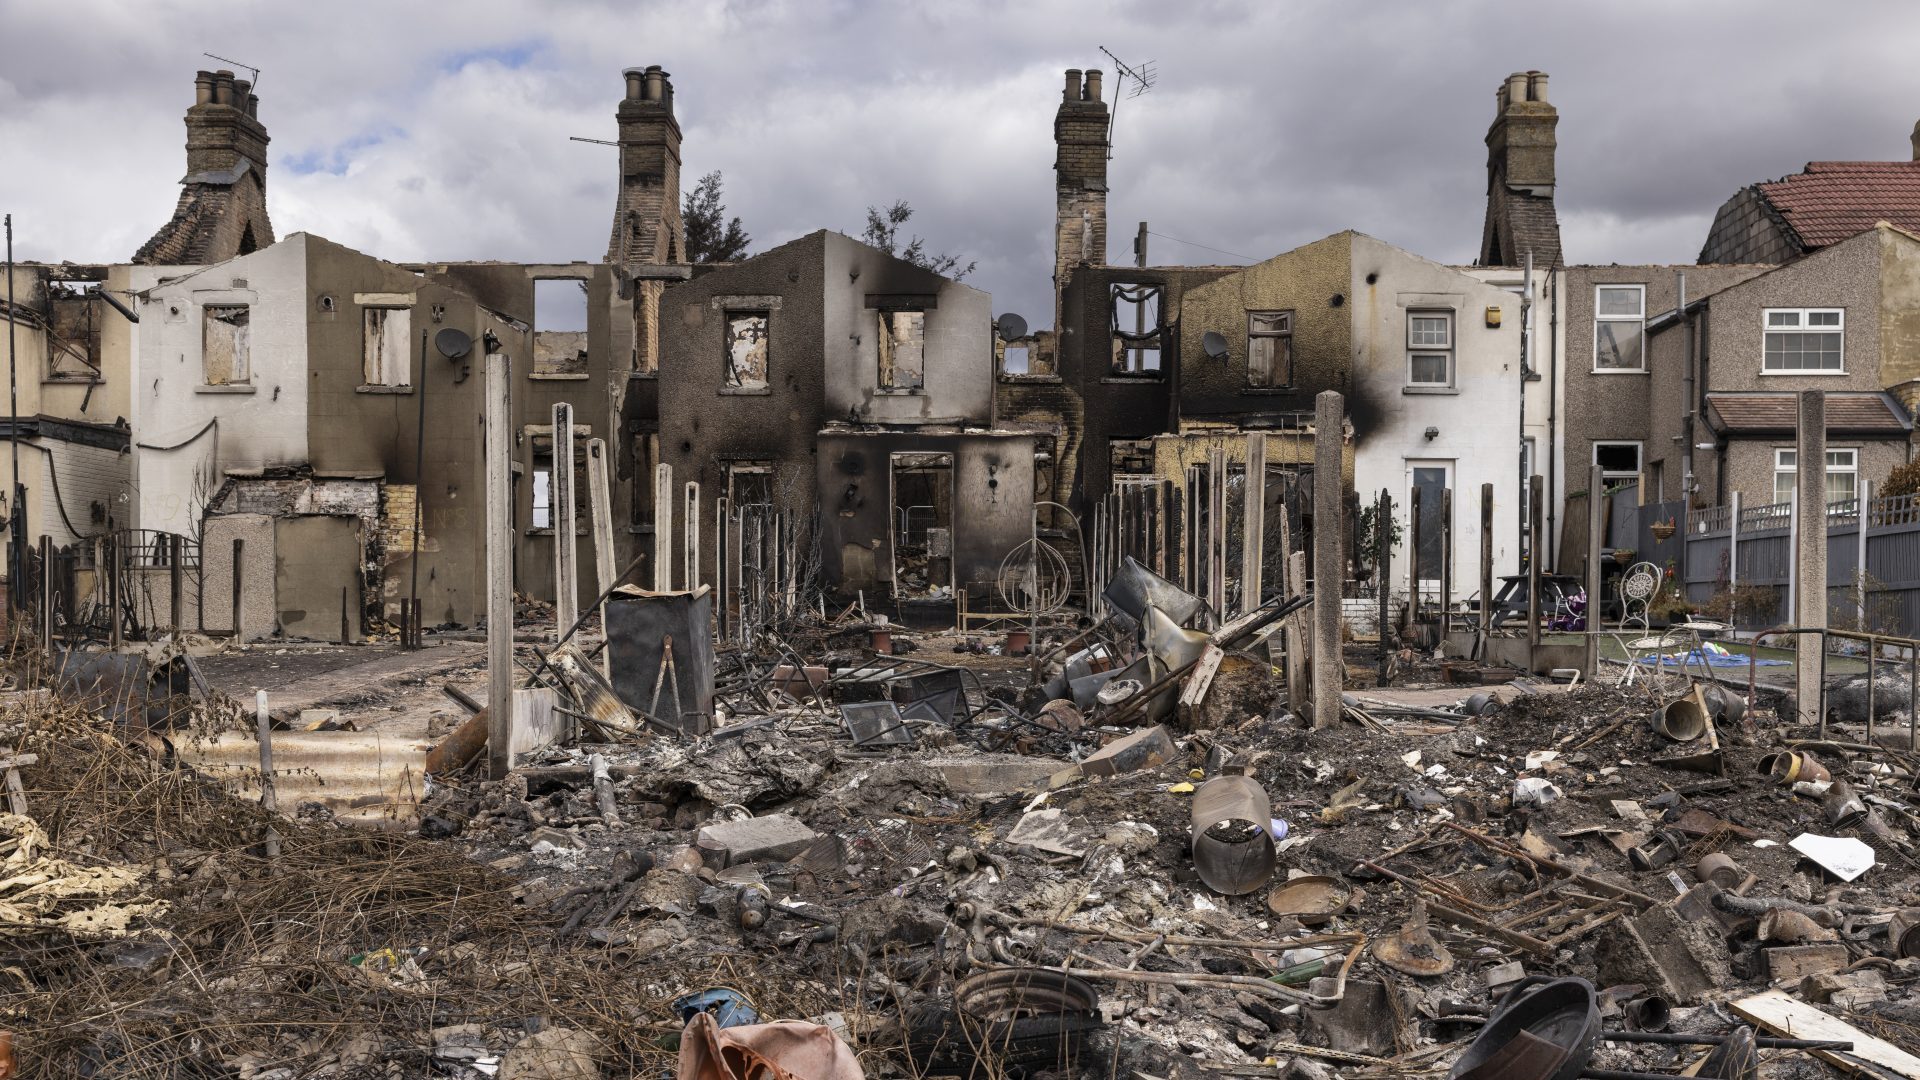 Homes gutted by fire on July 25, 2022 in Wennington, Greater 
London, on the day the UK 
recorded its highest ever temperatures. Photo: Dan Kitwood/Getty